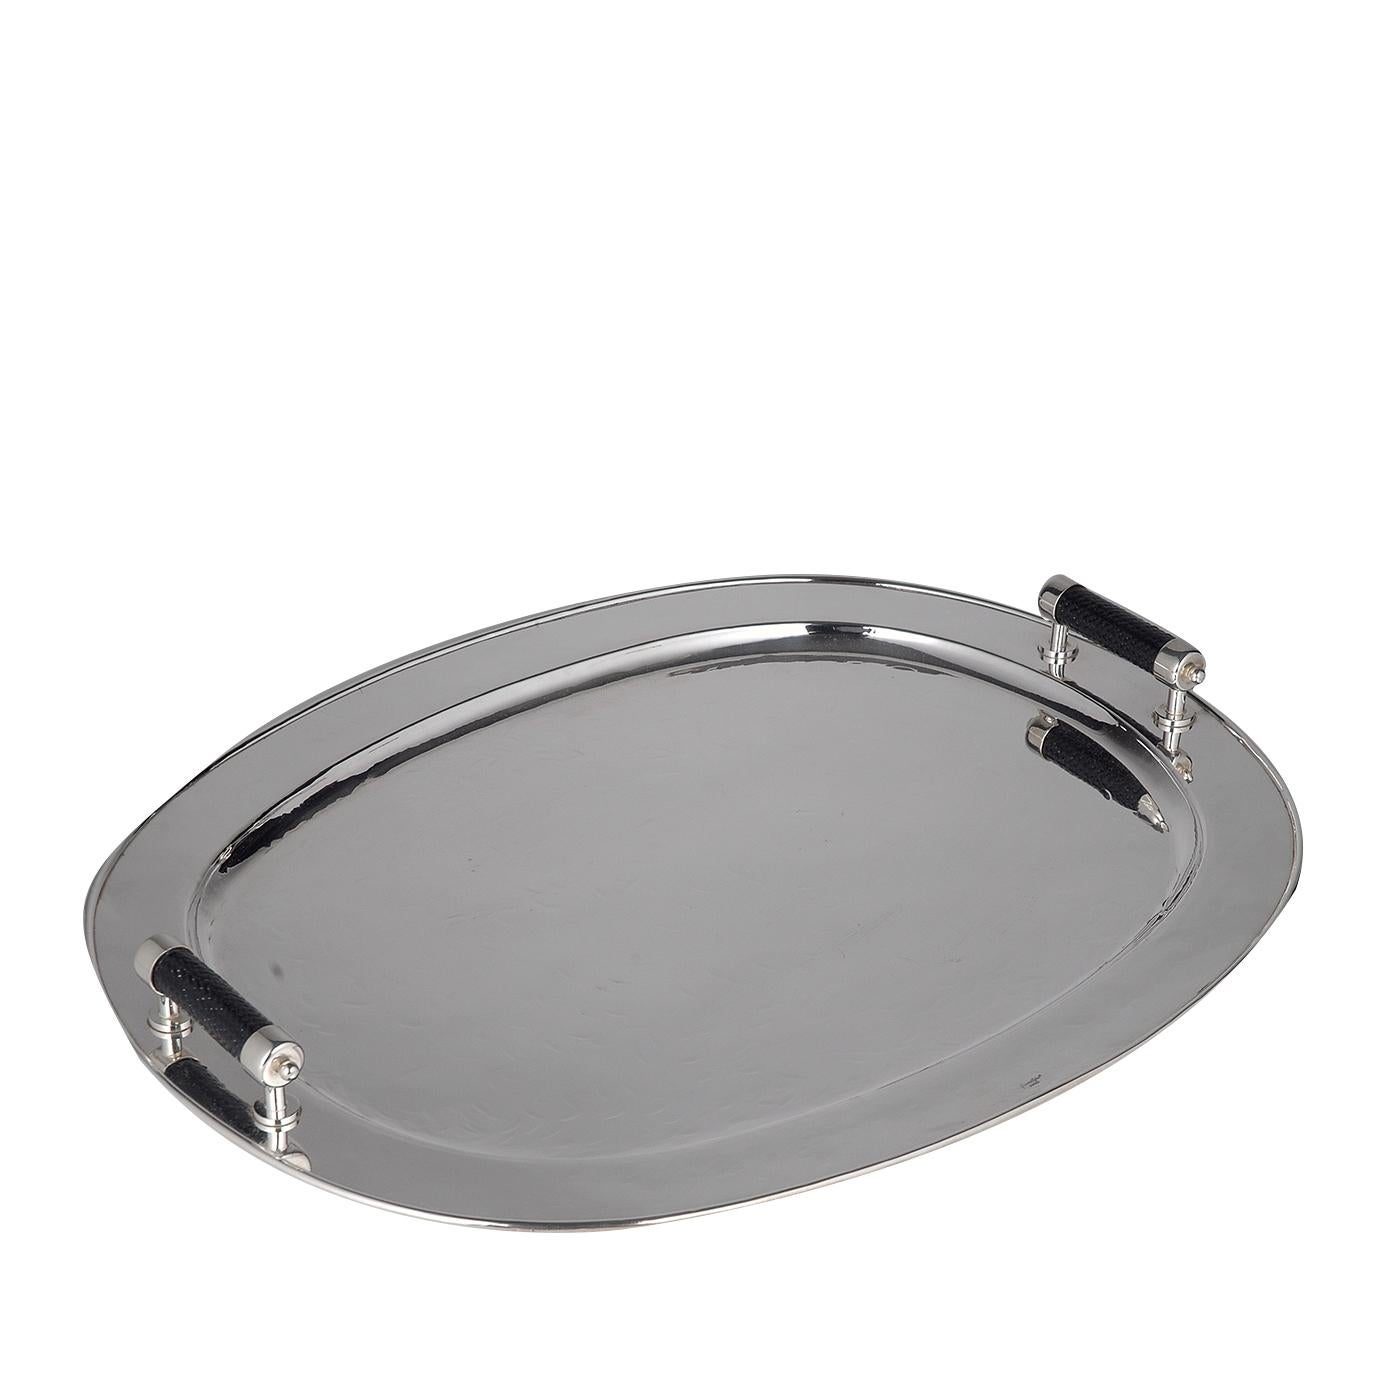 Italian Oval Tray with Carbon Fiber Handles